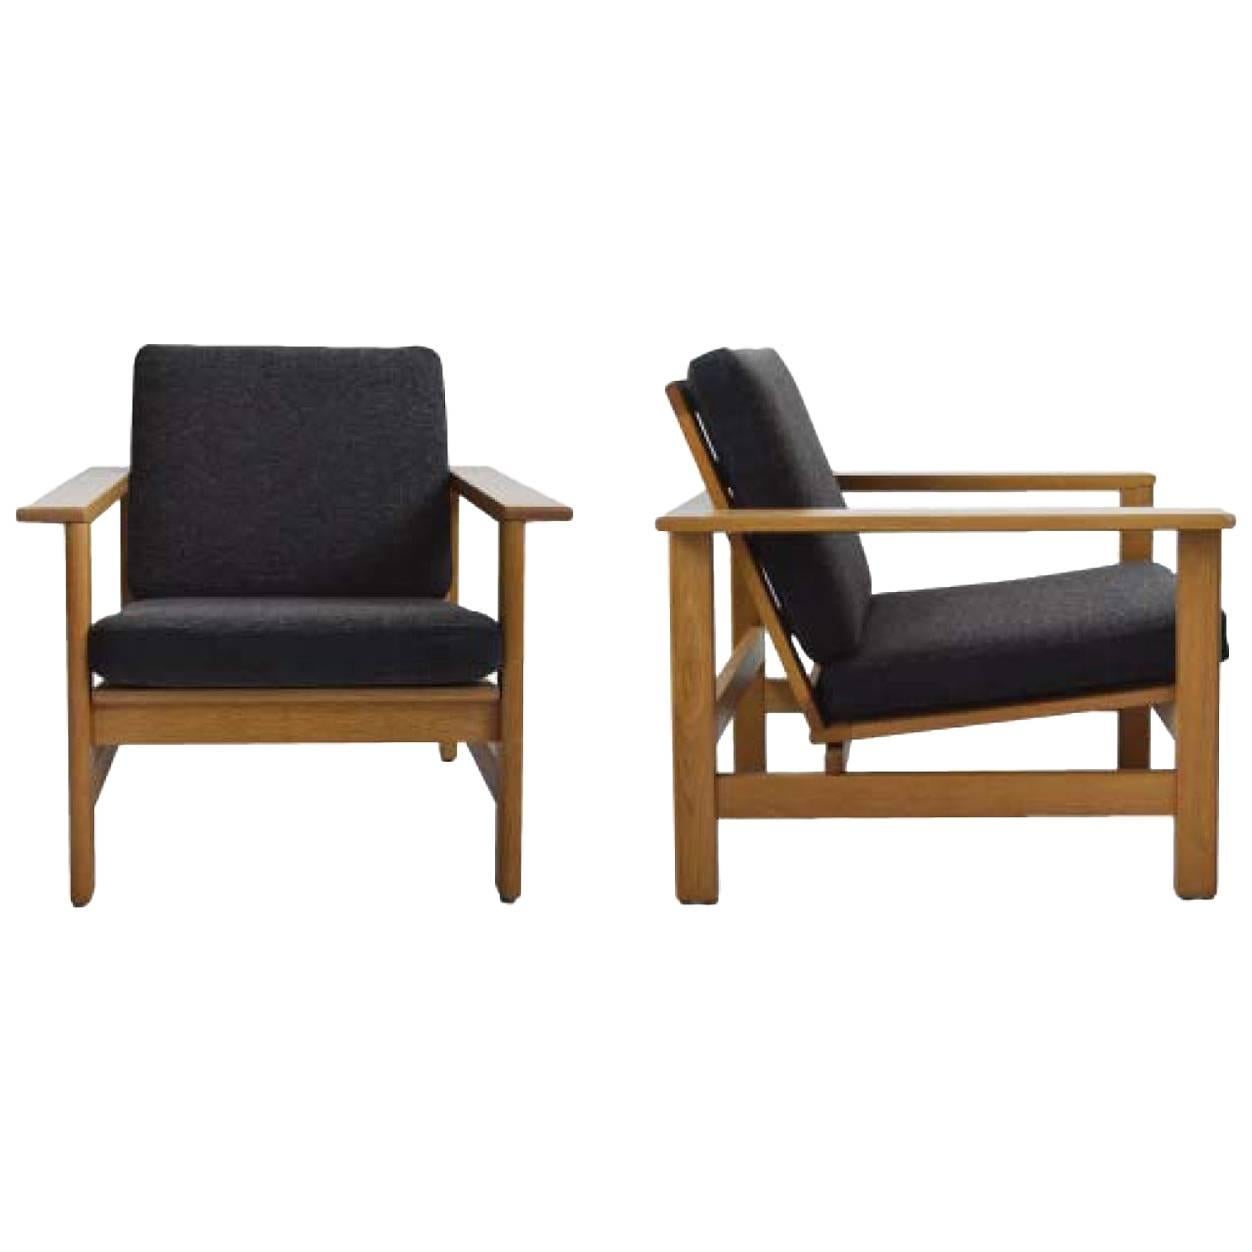 Pair of Wood Frame Soren Holst Lounge Chairs, Mid-Century, Danish For Sale